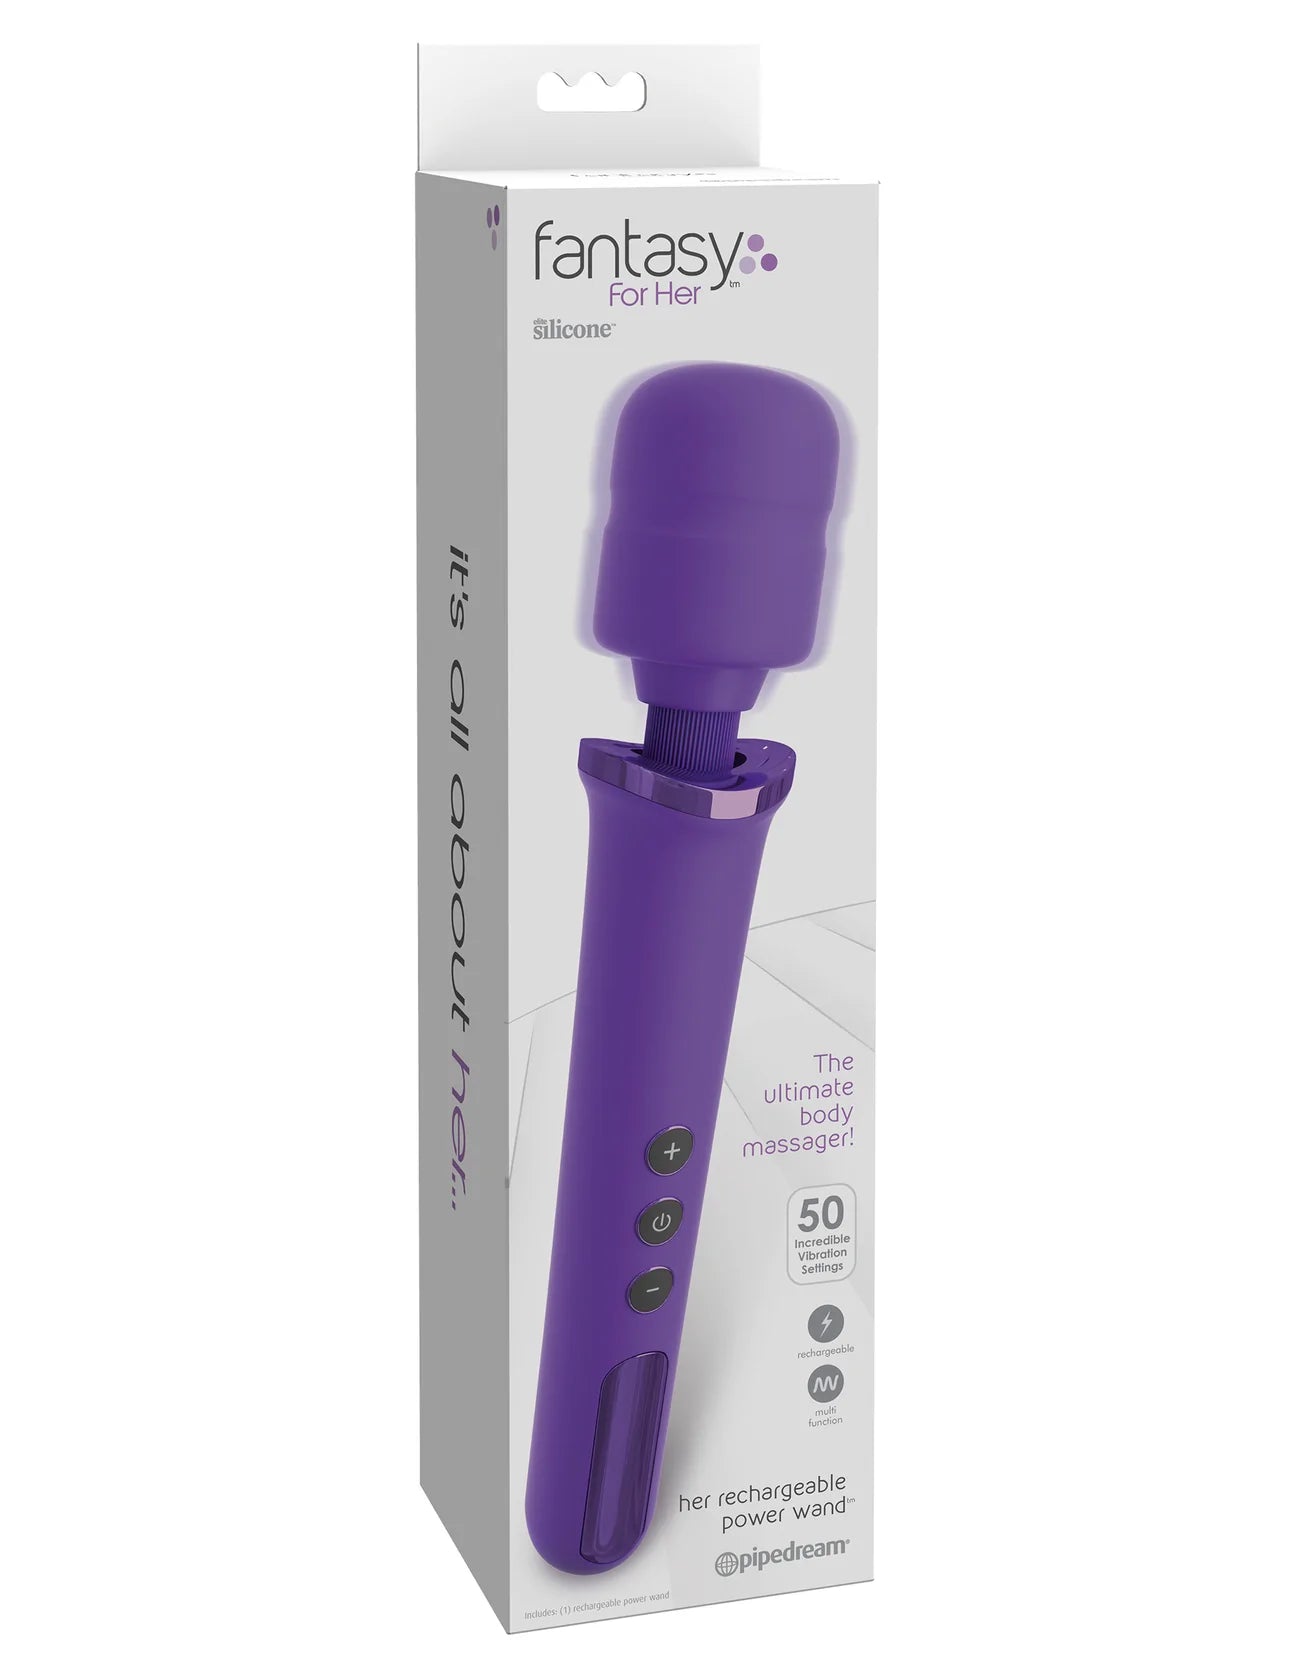 Fantasy For Her Power Wand